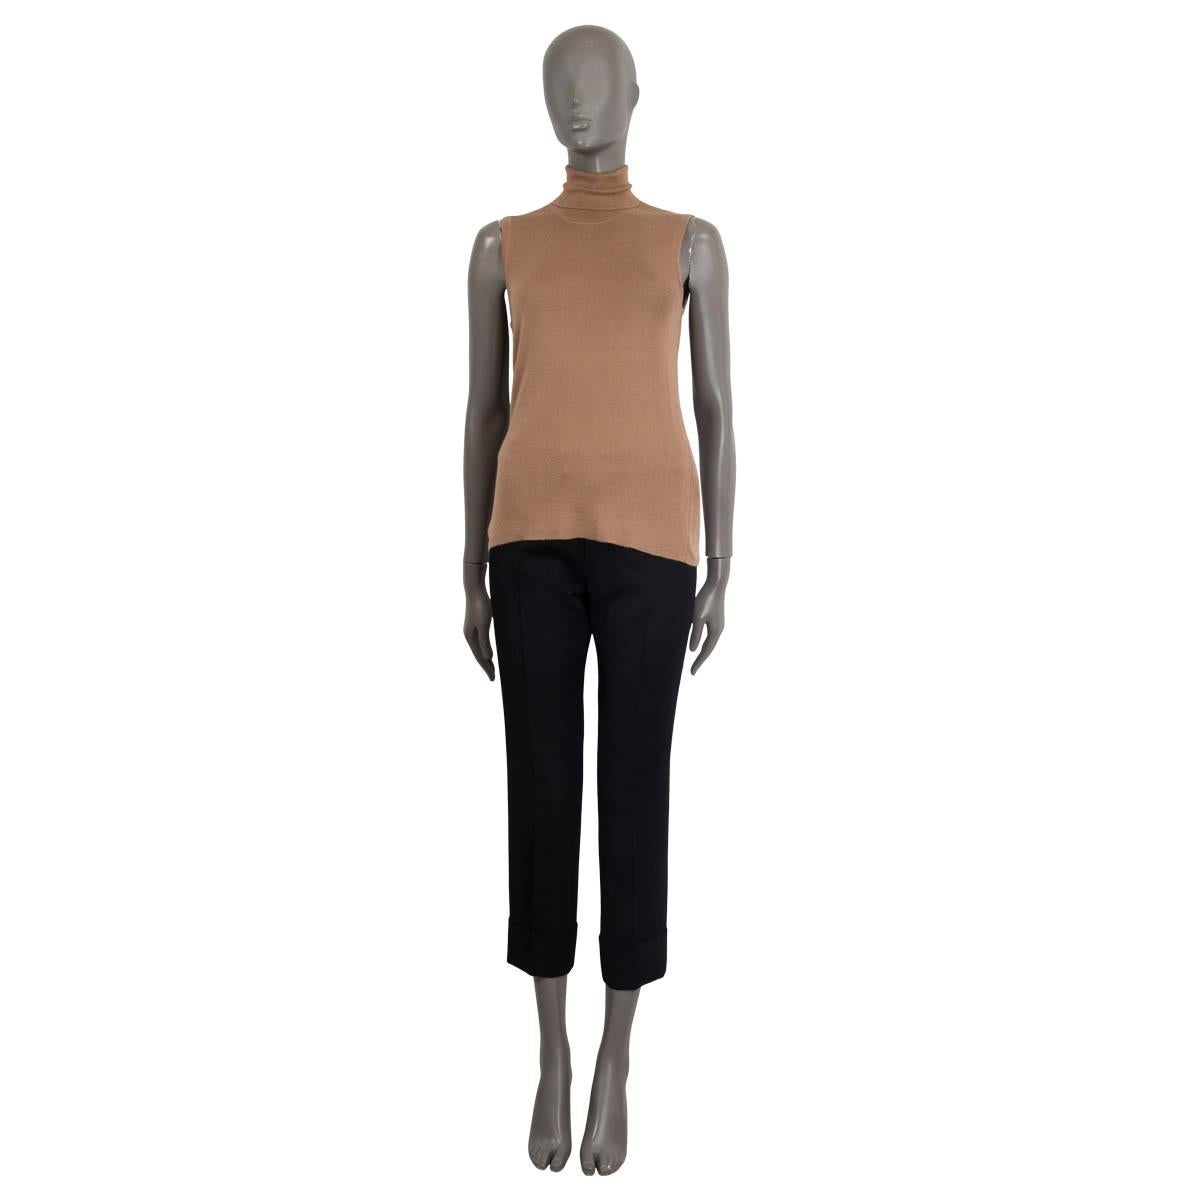 100% authentic Prada sleeveless turtleneck sweater in camel cashmere (70%) and silk (30%). Has been worn and is in excellent condition.

Matching cardigan available seperately. 

Measurements
Tag Size	46
Size	XL
Bust	78cm (30.4in) to 116cm